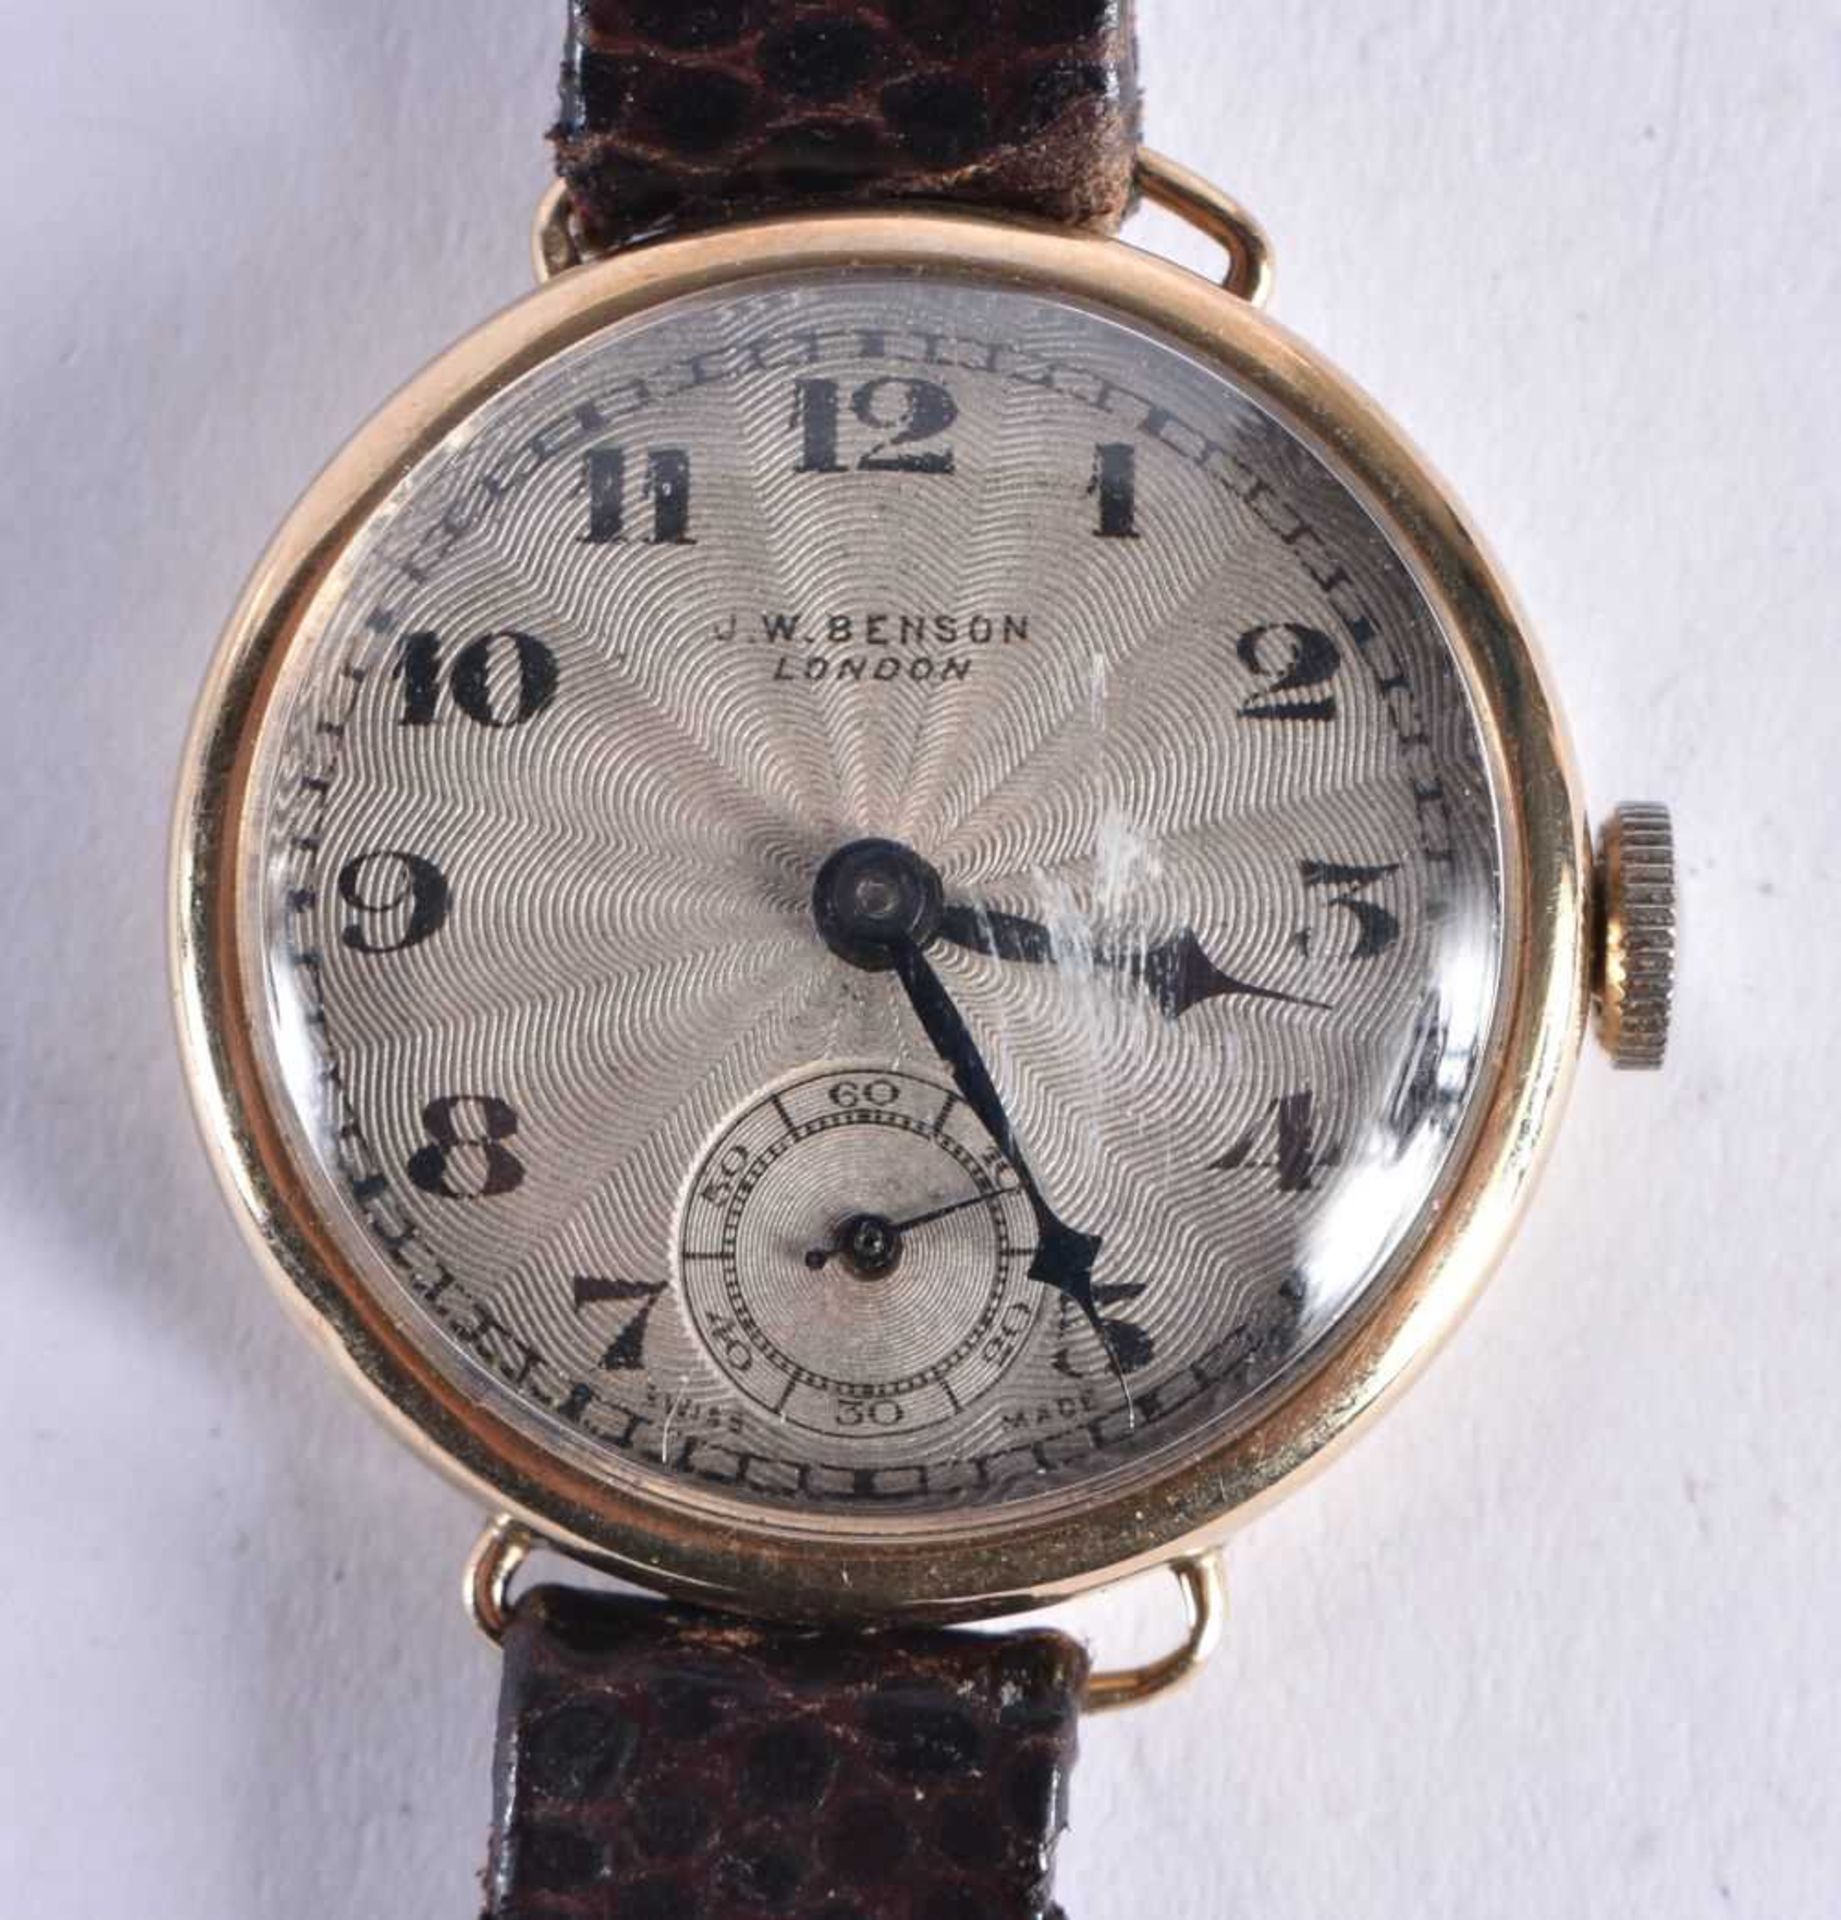 J.W. BENSON 9ct Gold Cased Antique Trench Style Wristwatch Hand-wind Working. 17 grams. 2.75 cm wide